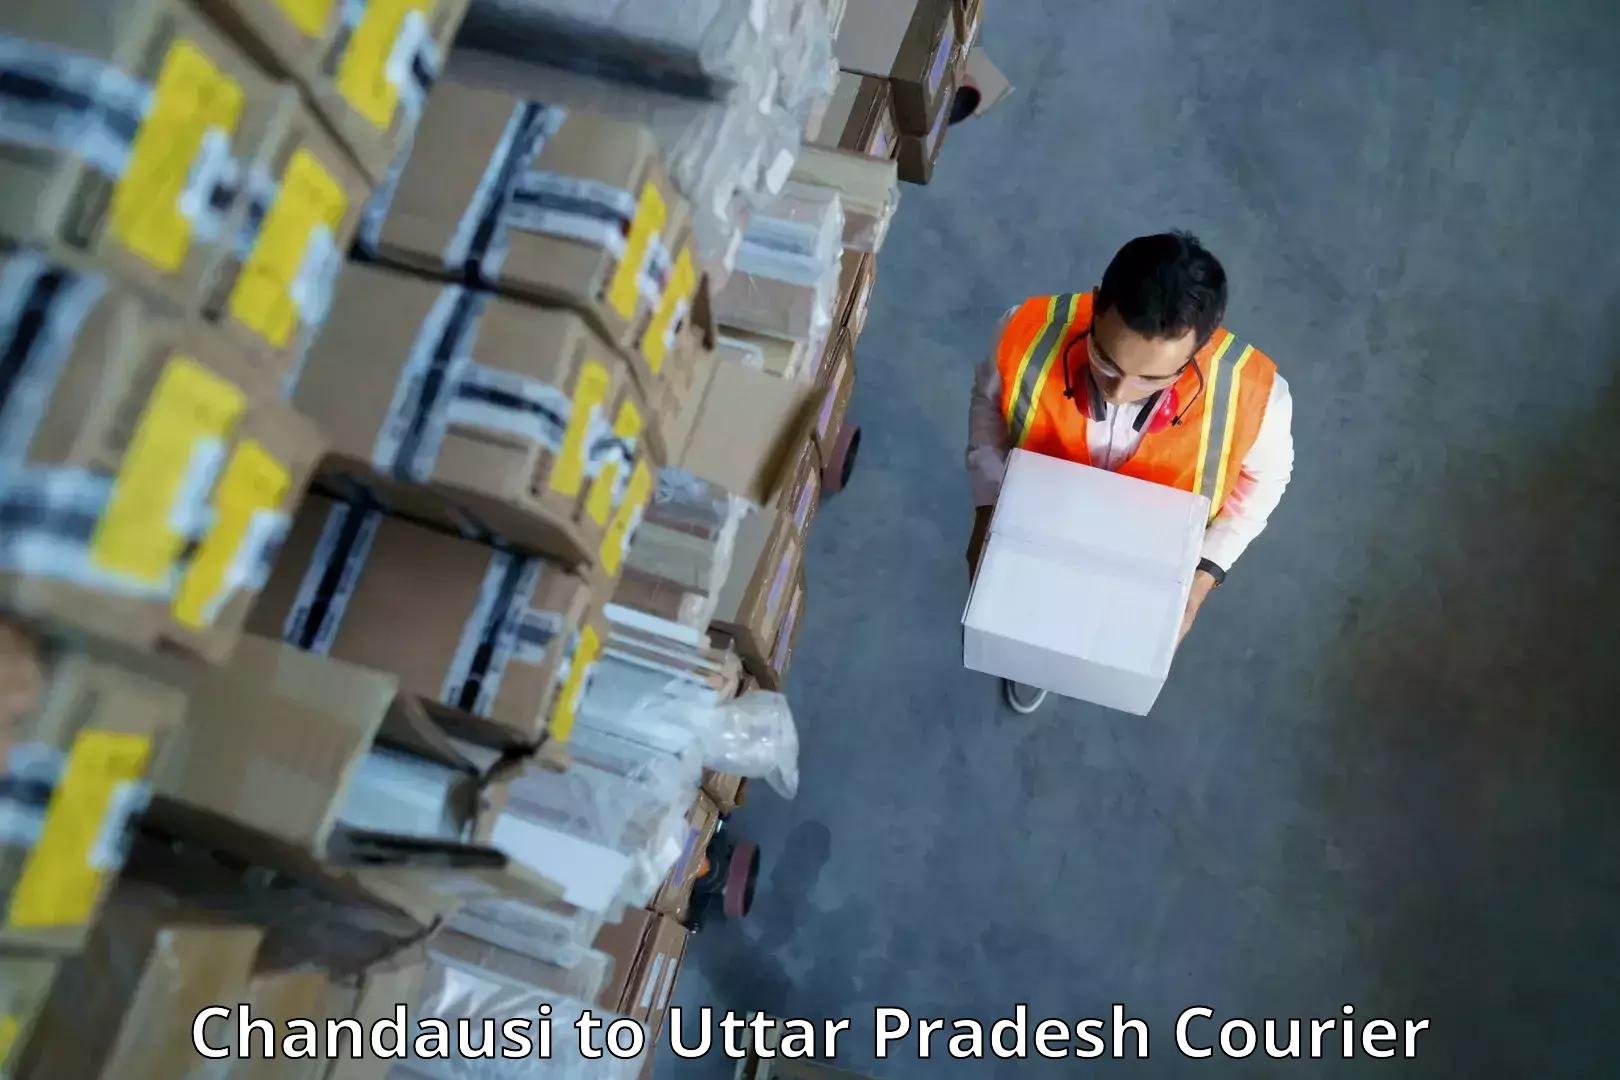 Courier service partnerships Chandausi to Sonbhadra